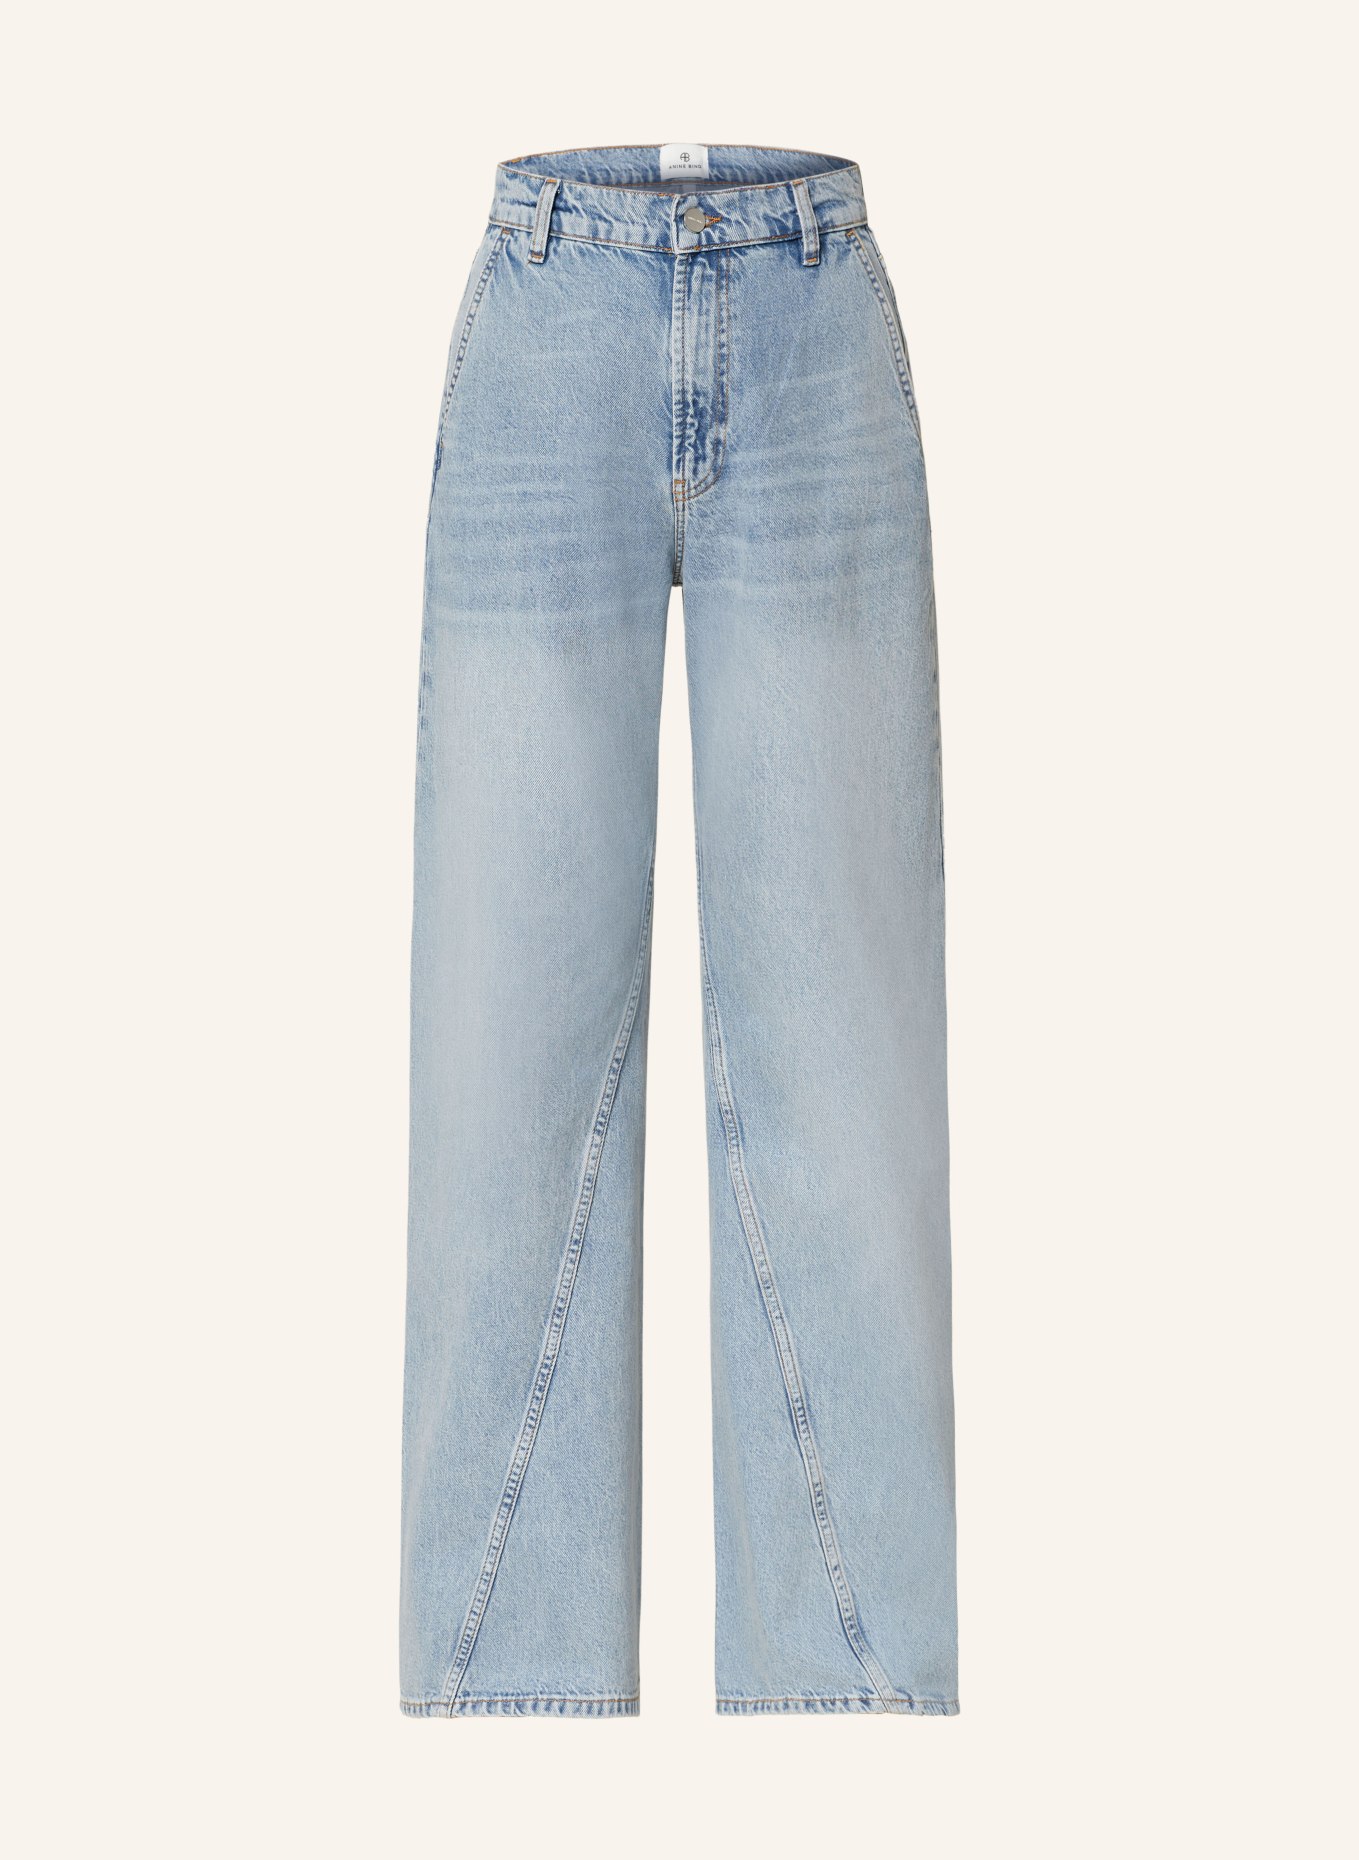 ANINE BING Flared Jeans BRILEY, Farbe: WASHED BLUE WASHED BLUE (Bild 1)